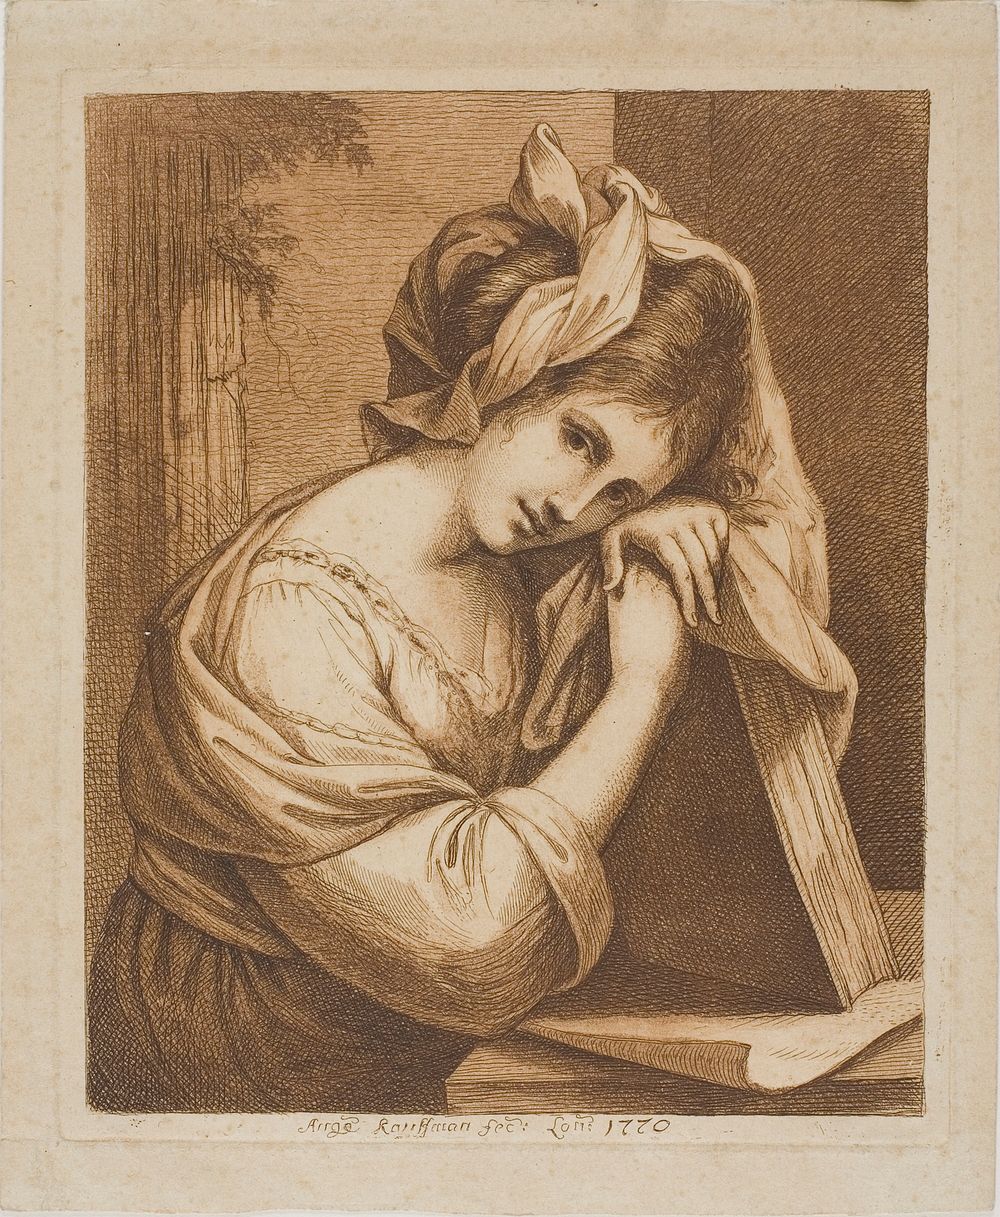 Woman Resting Her Head on a Book by Angelica Kauffmann